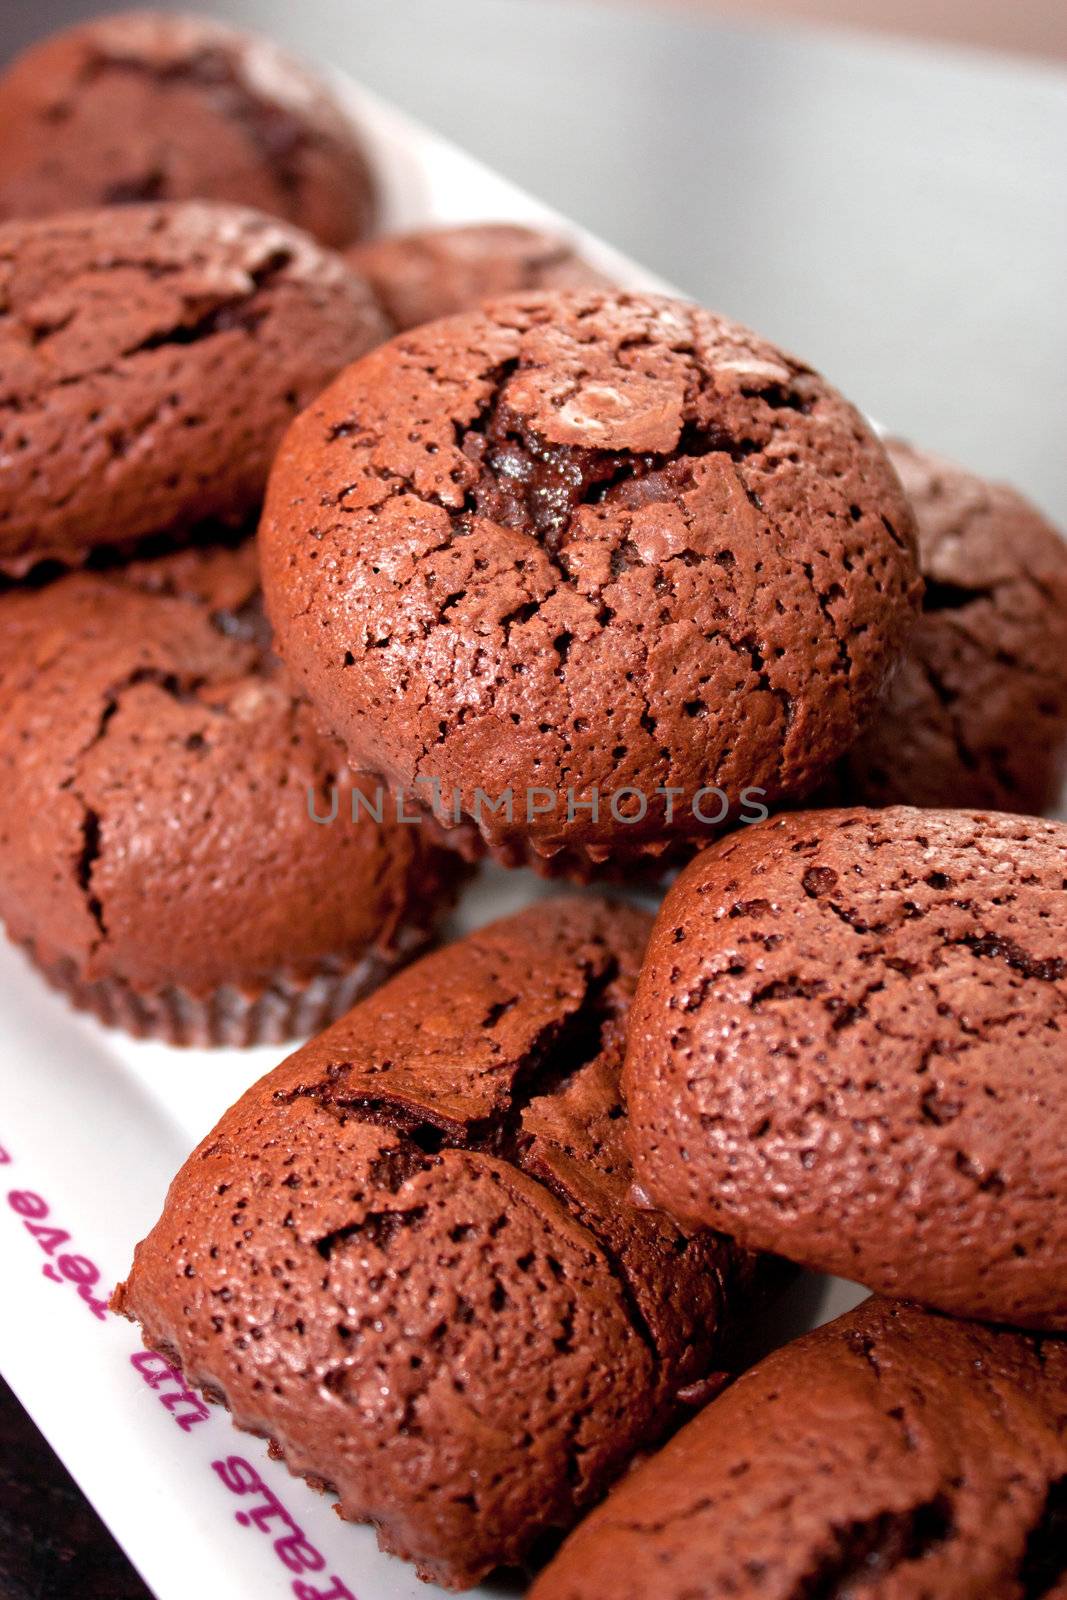 Cupcakes with chocolate, crunchy and sweet